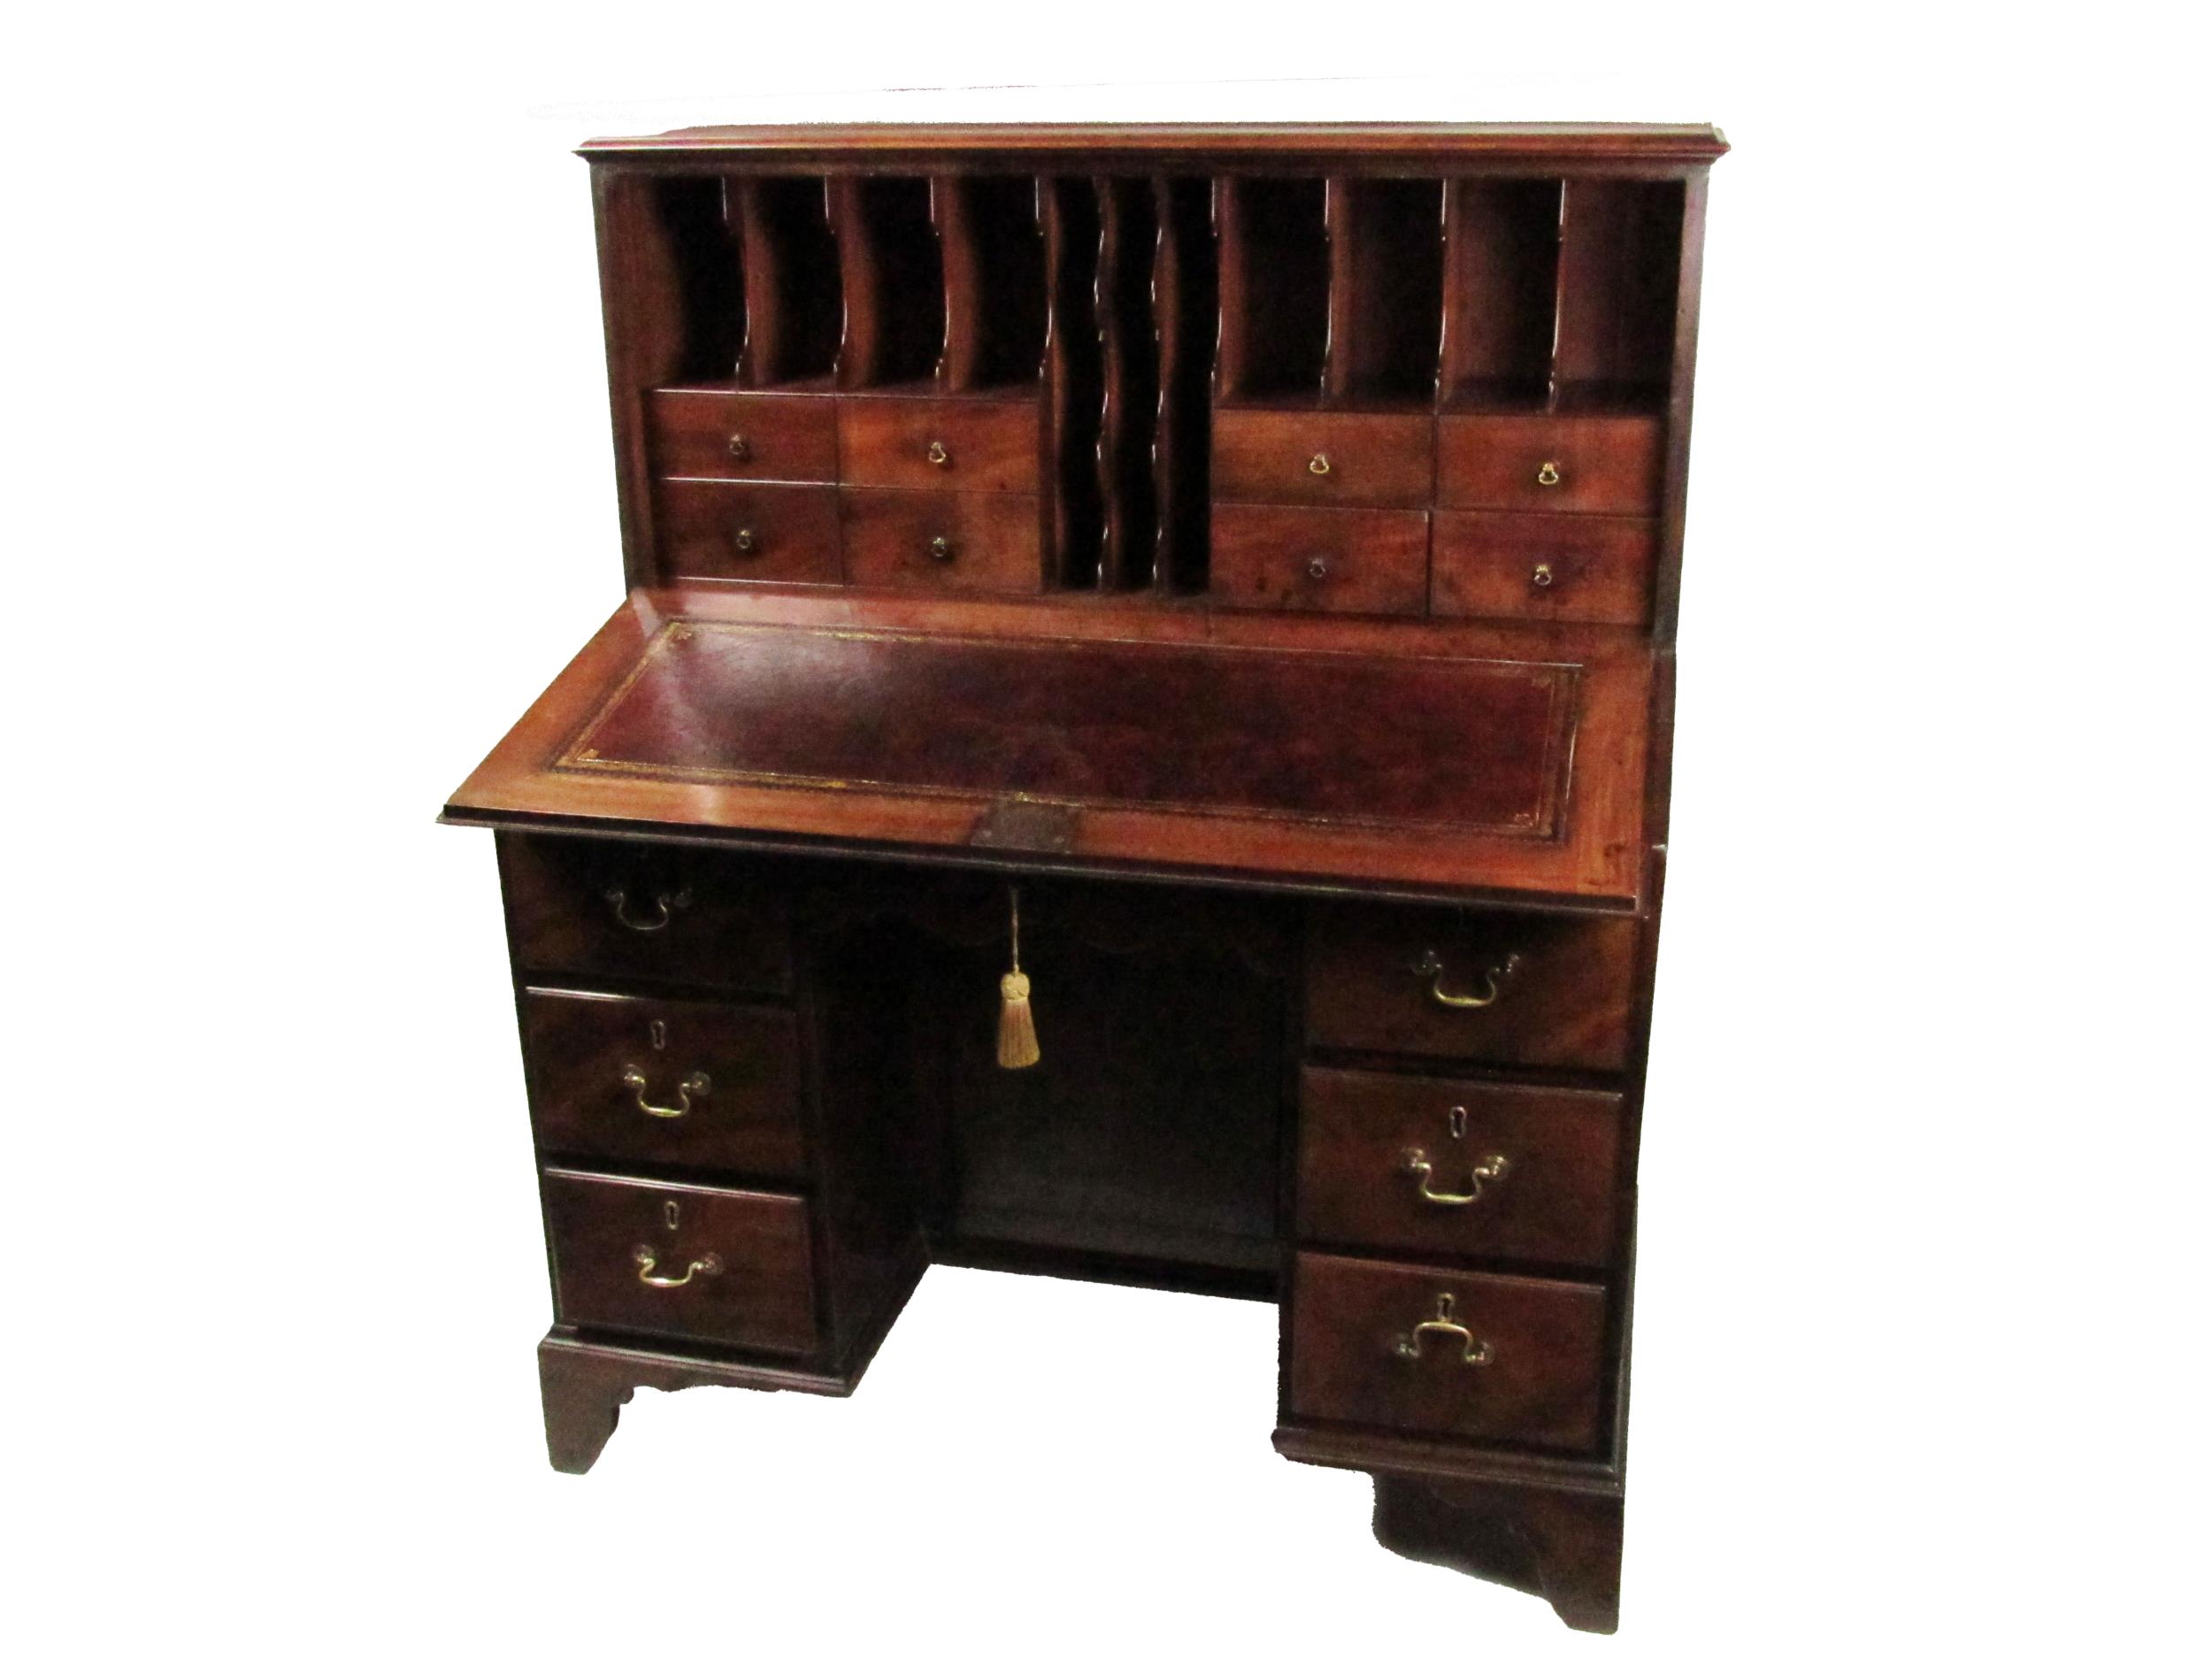 A rare and important Irish Georgian mahogany Estate Desk, in the manner of Chippendale, the